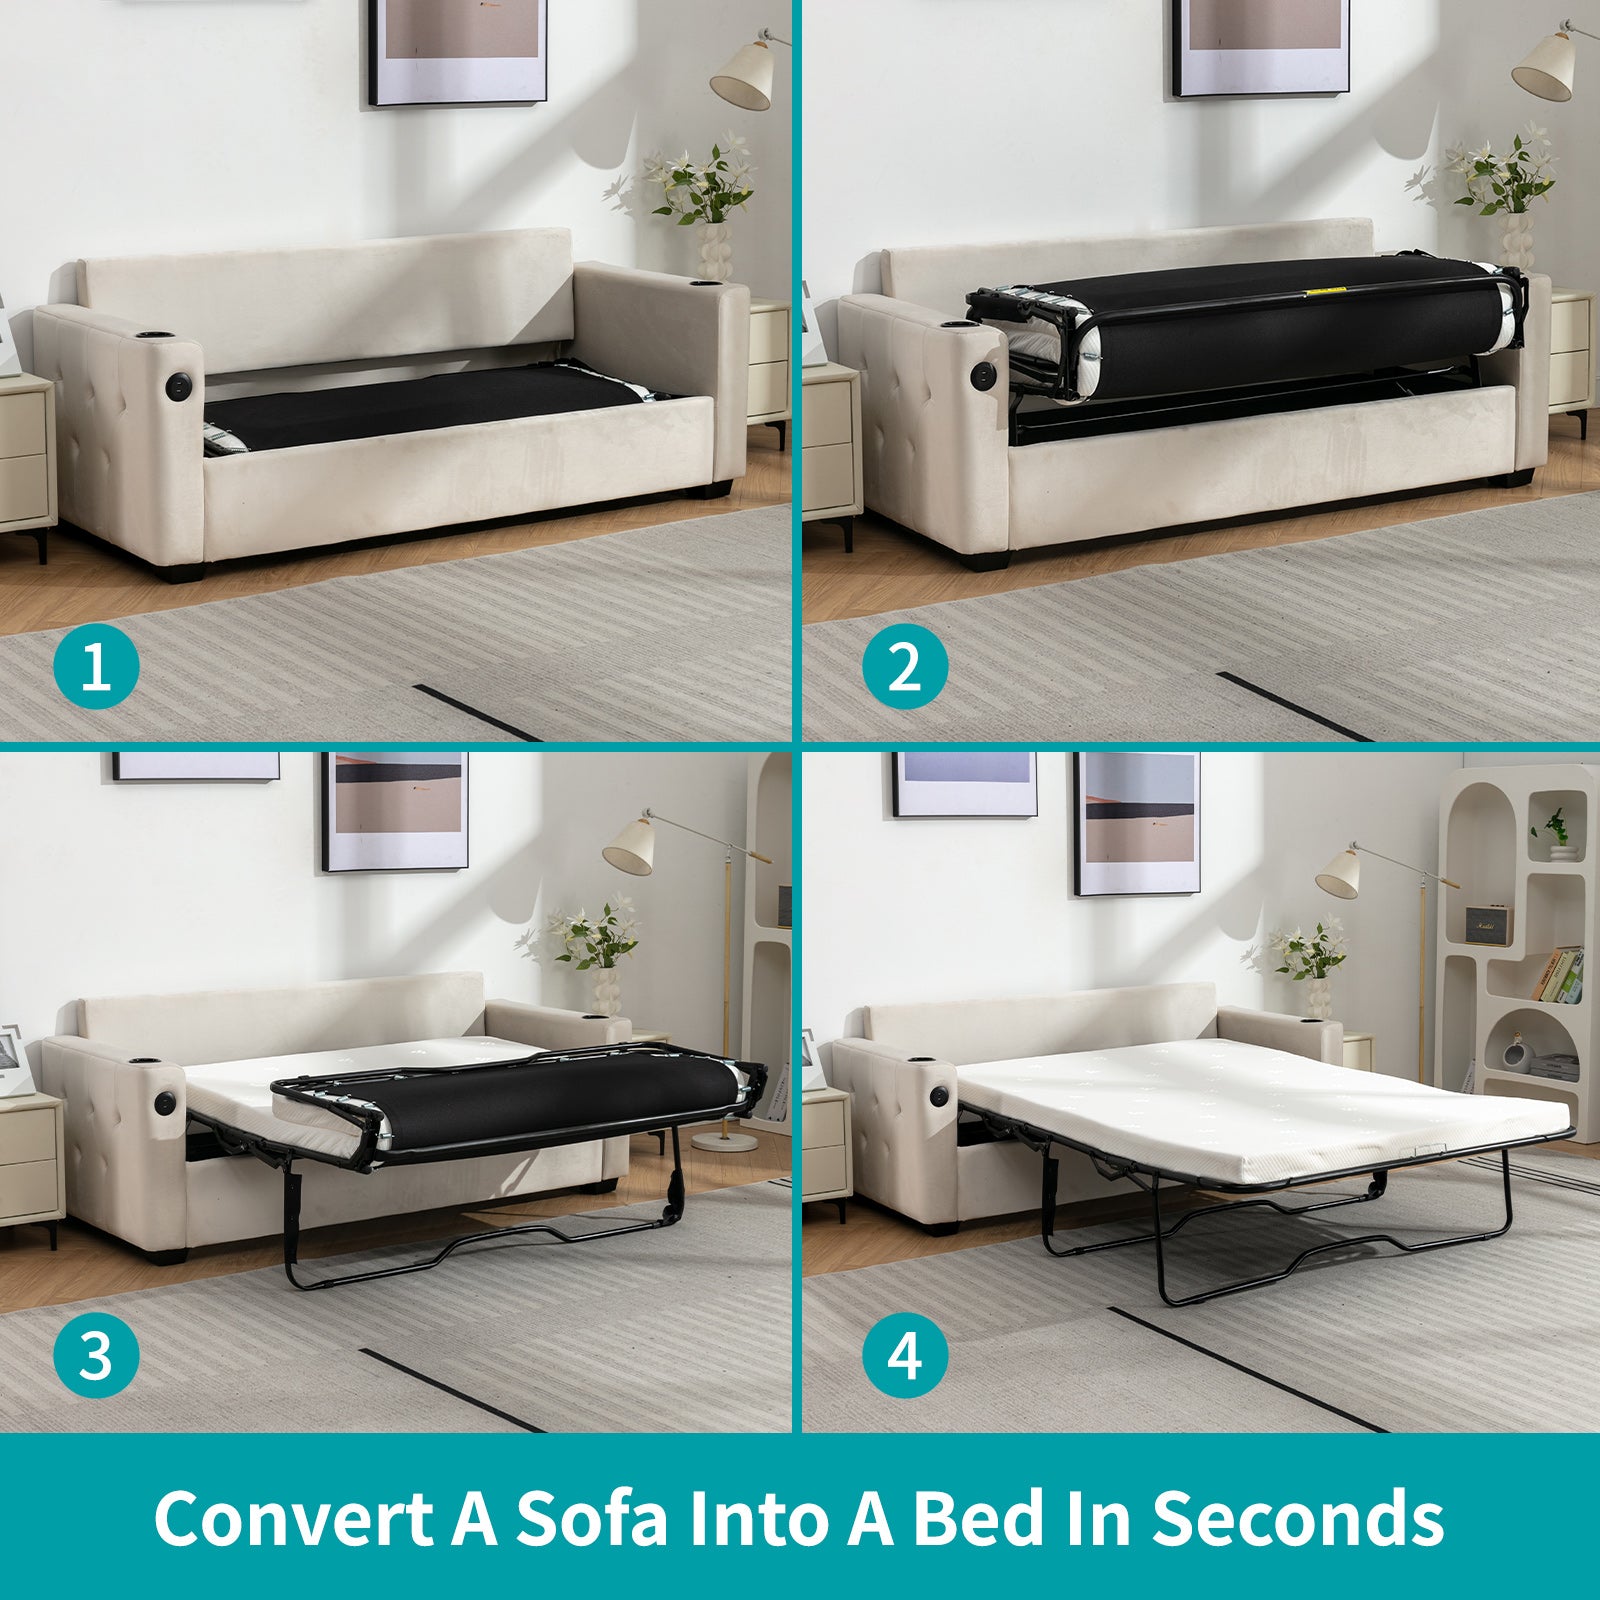 Cecer 2-in-1 Convertible Sleeper Sofa Bed,Pull Out Sofa Bed,Daybed with Memory Foam Mattress, USB Ports & Cup Holder-Perfect for Living Room